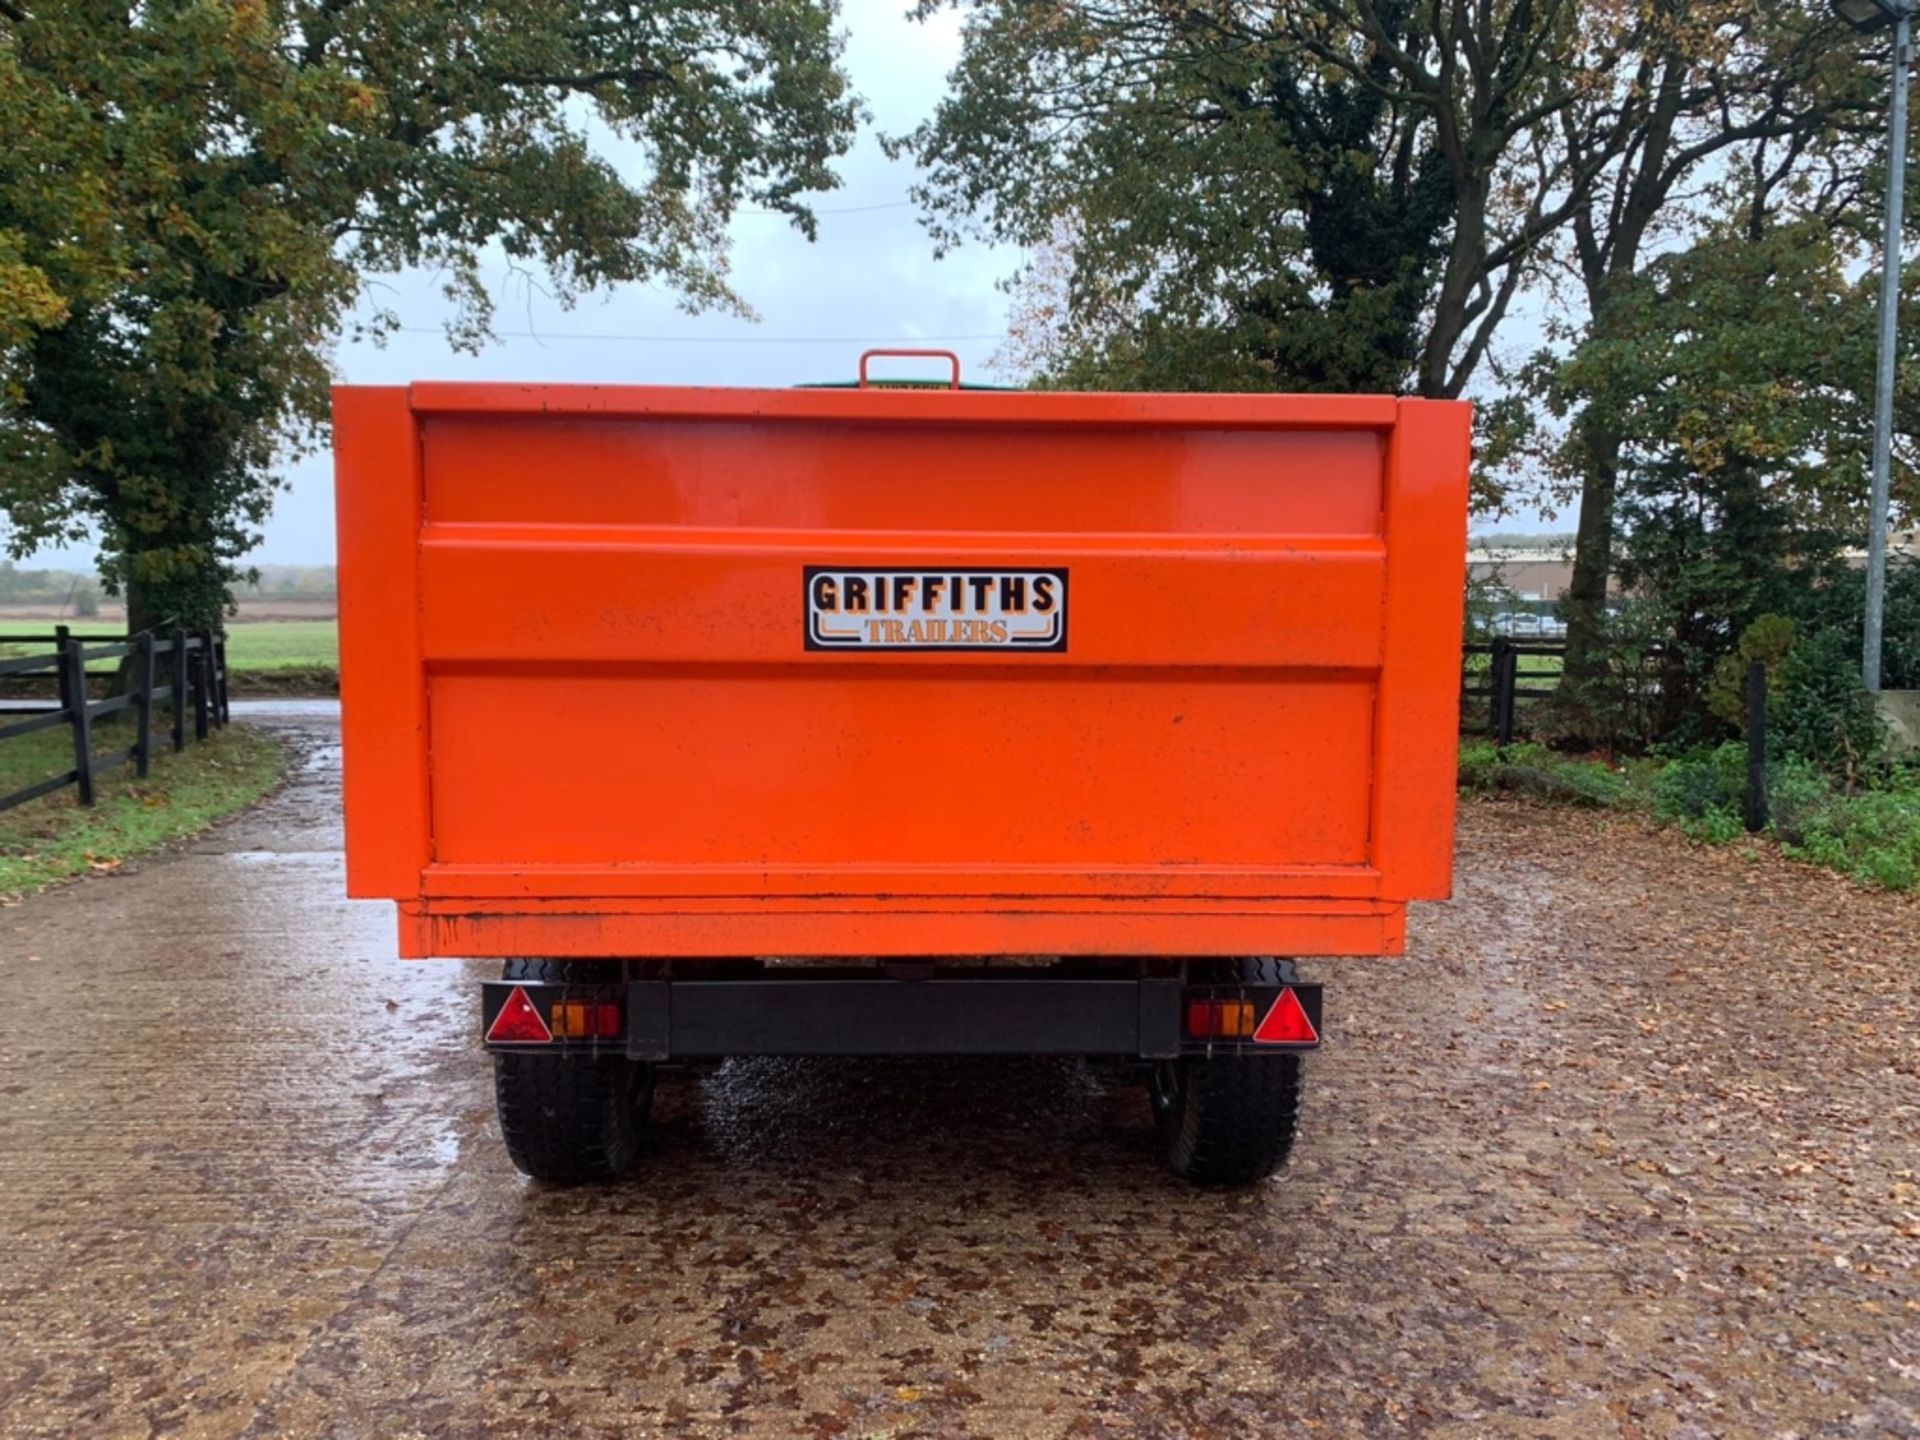 Griffiths 8ton tipping trailer - Image 5 of 9